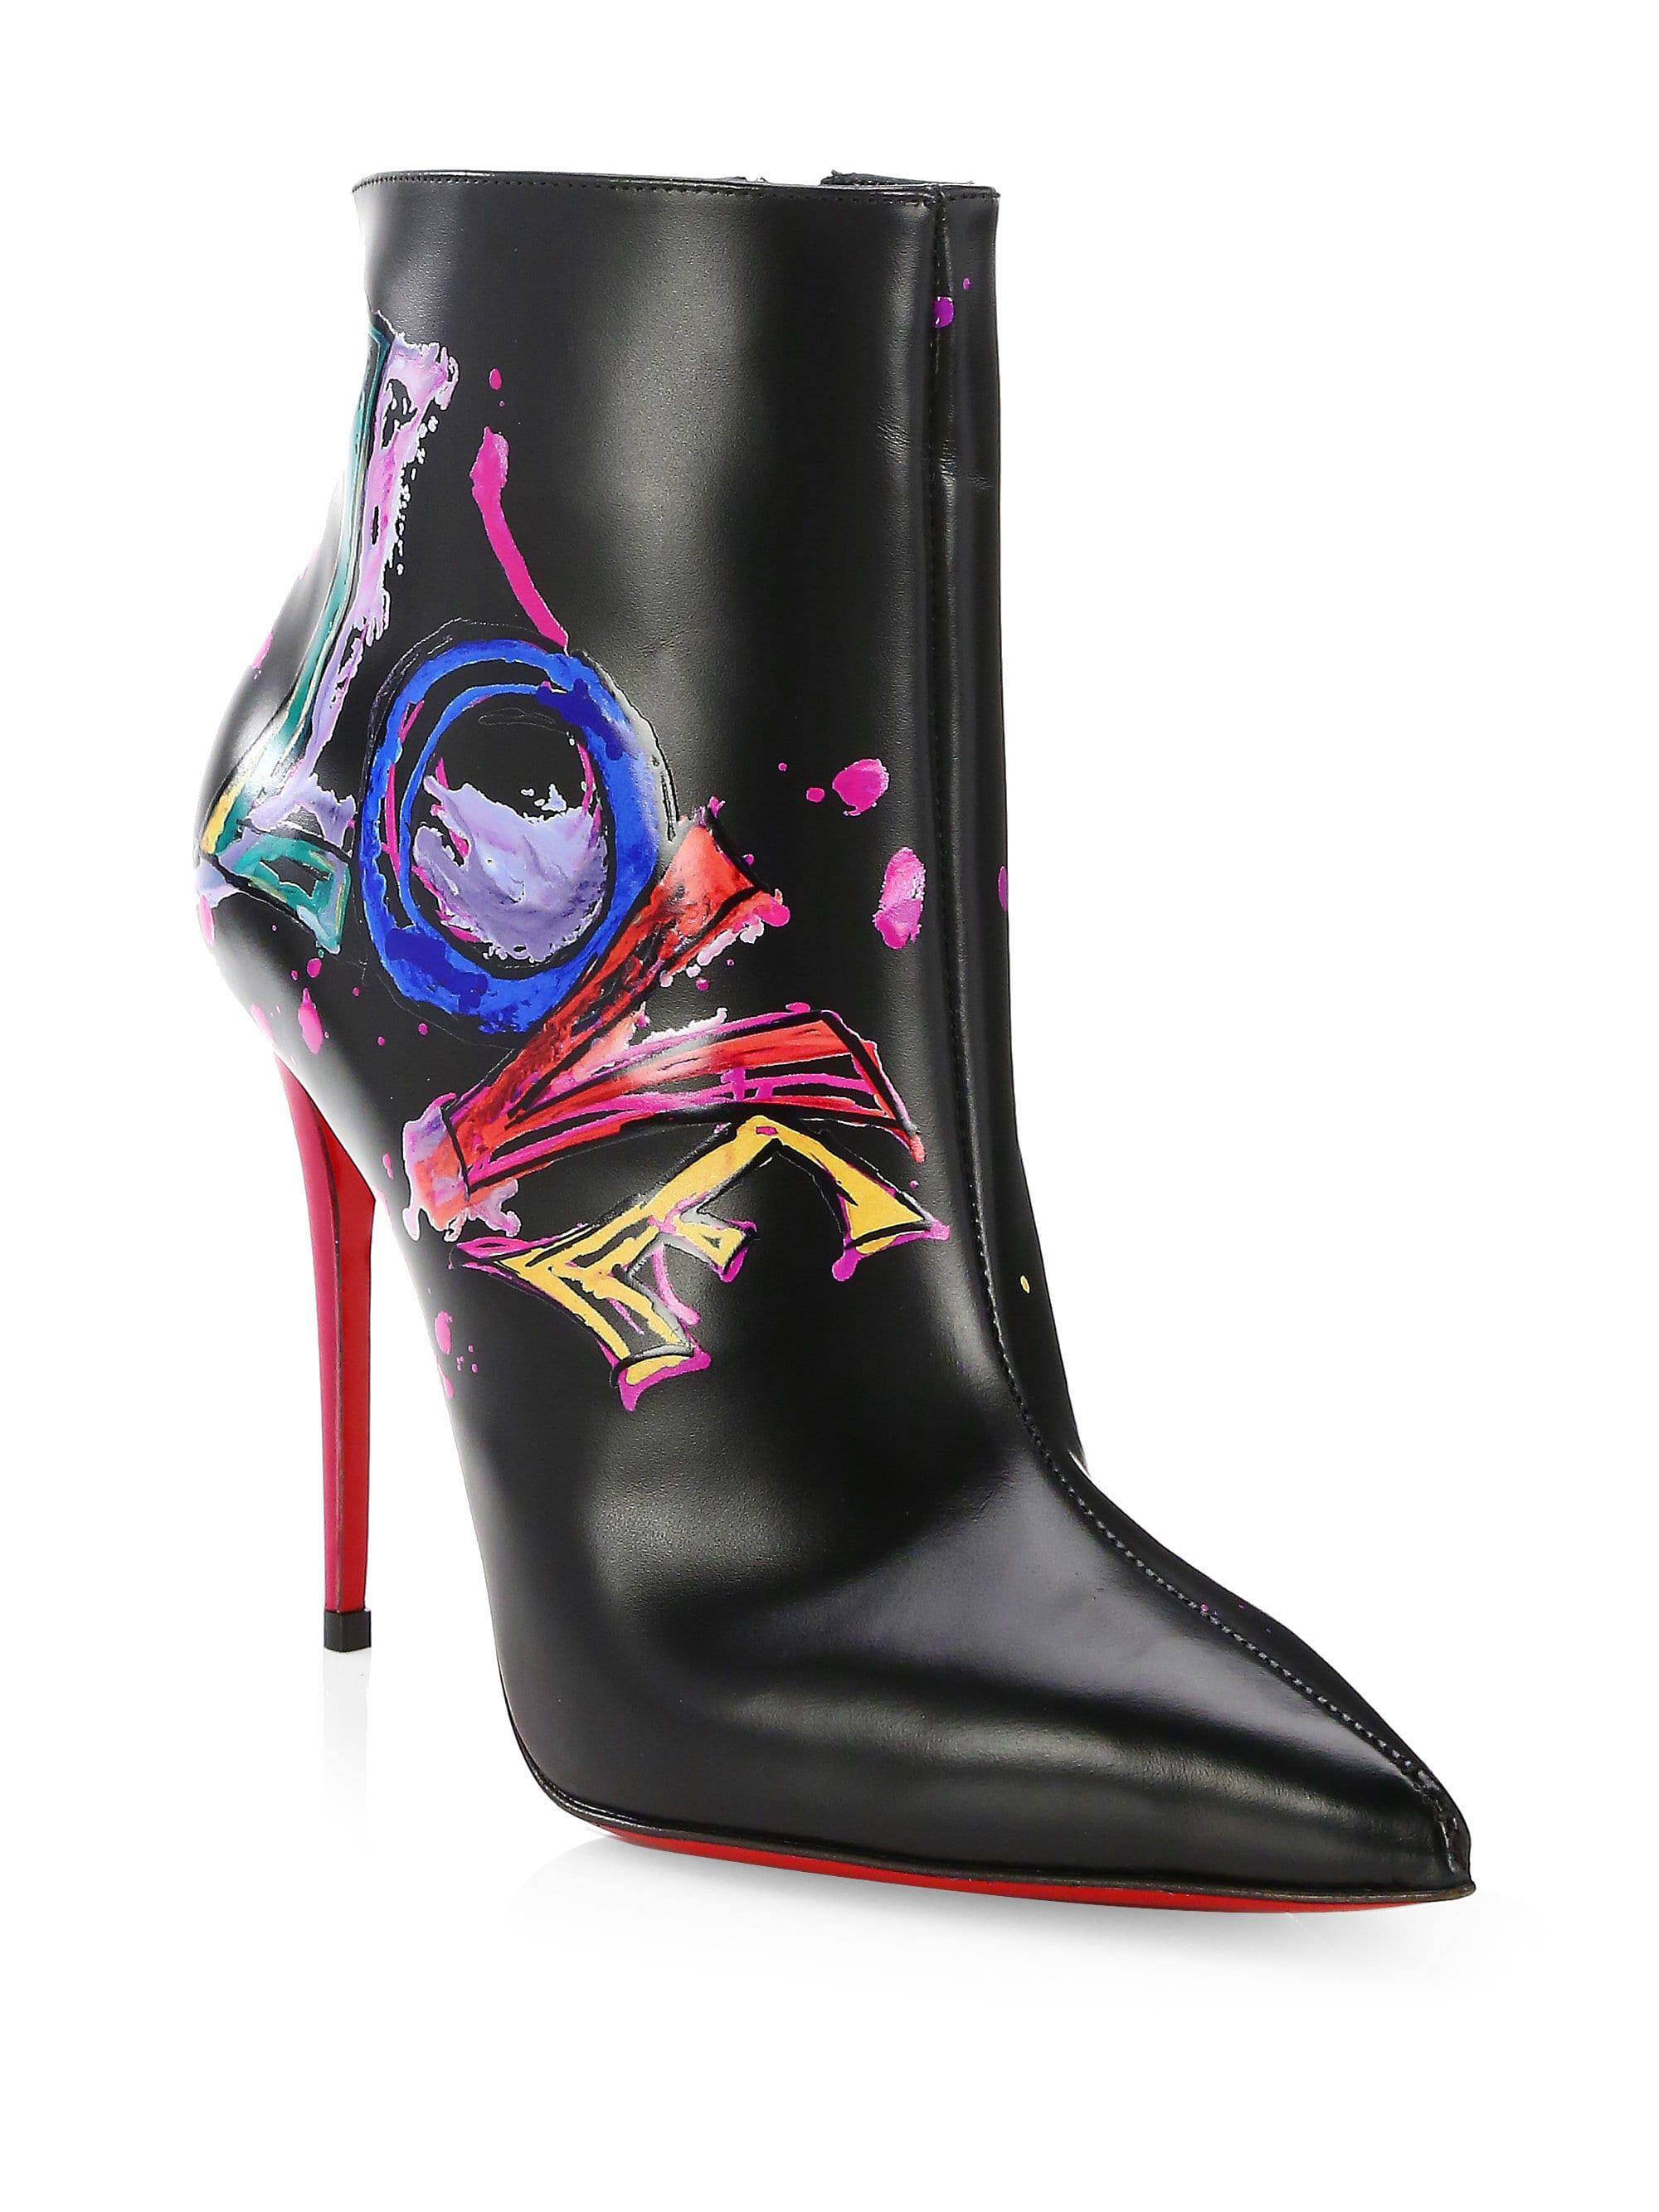 louboutin love boots